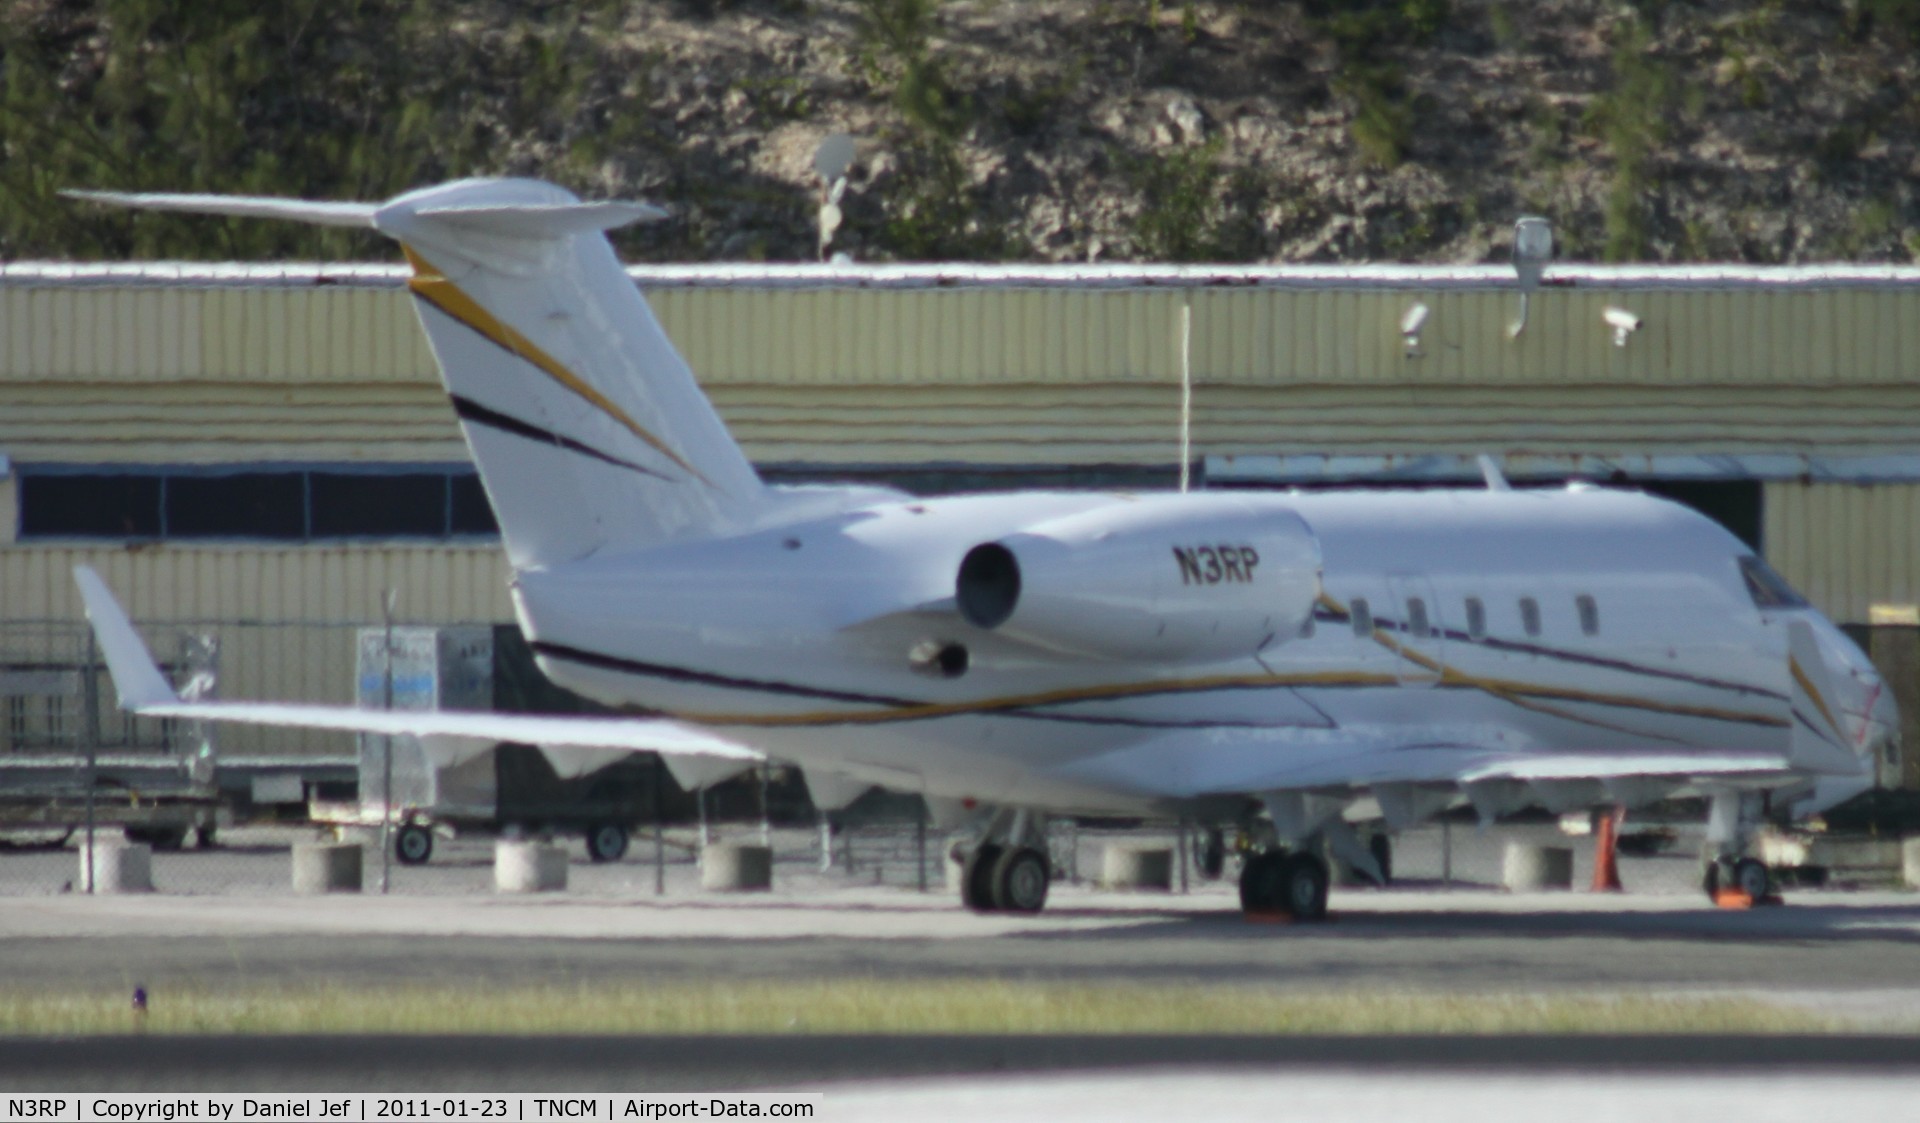 N3RP, 1981 Canadair Challenger 600 (CL-600-1A11) C/N 1011, n3RP park on the cargo ramp at TNCM